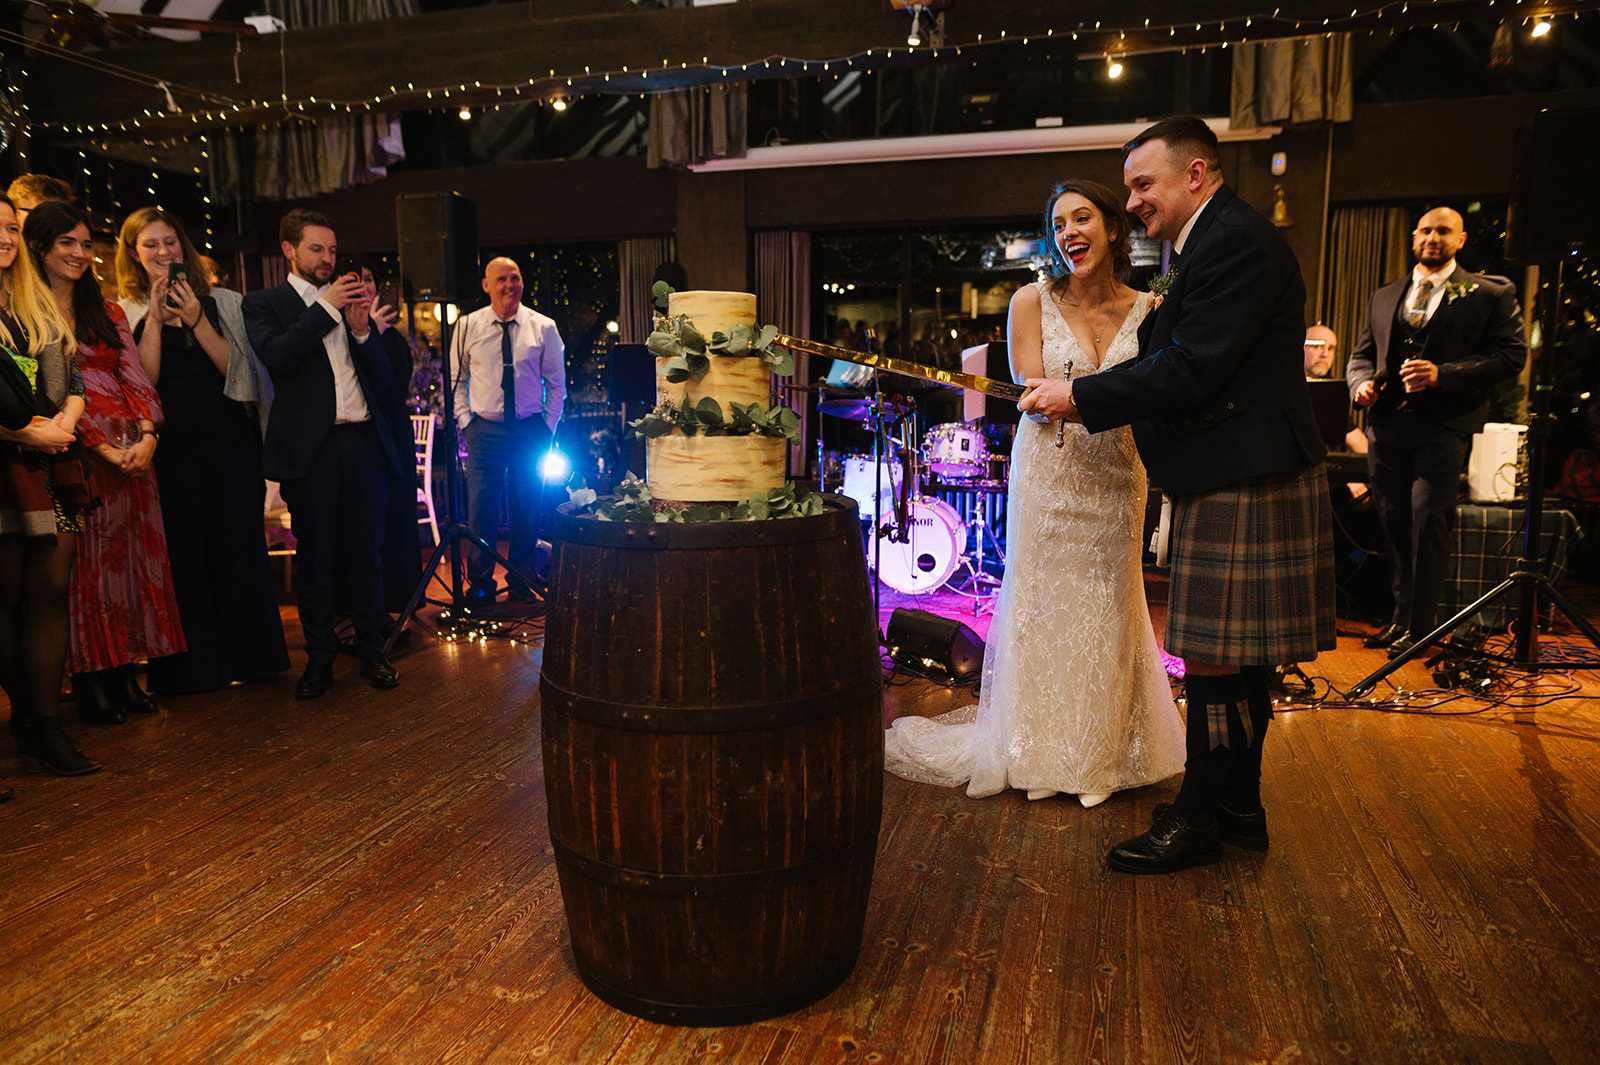 The bride and groom cut the cake at the Dickens Inn Central London Wedding